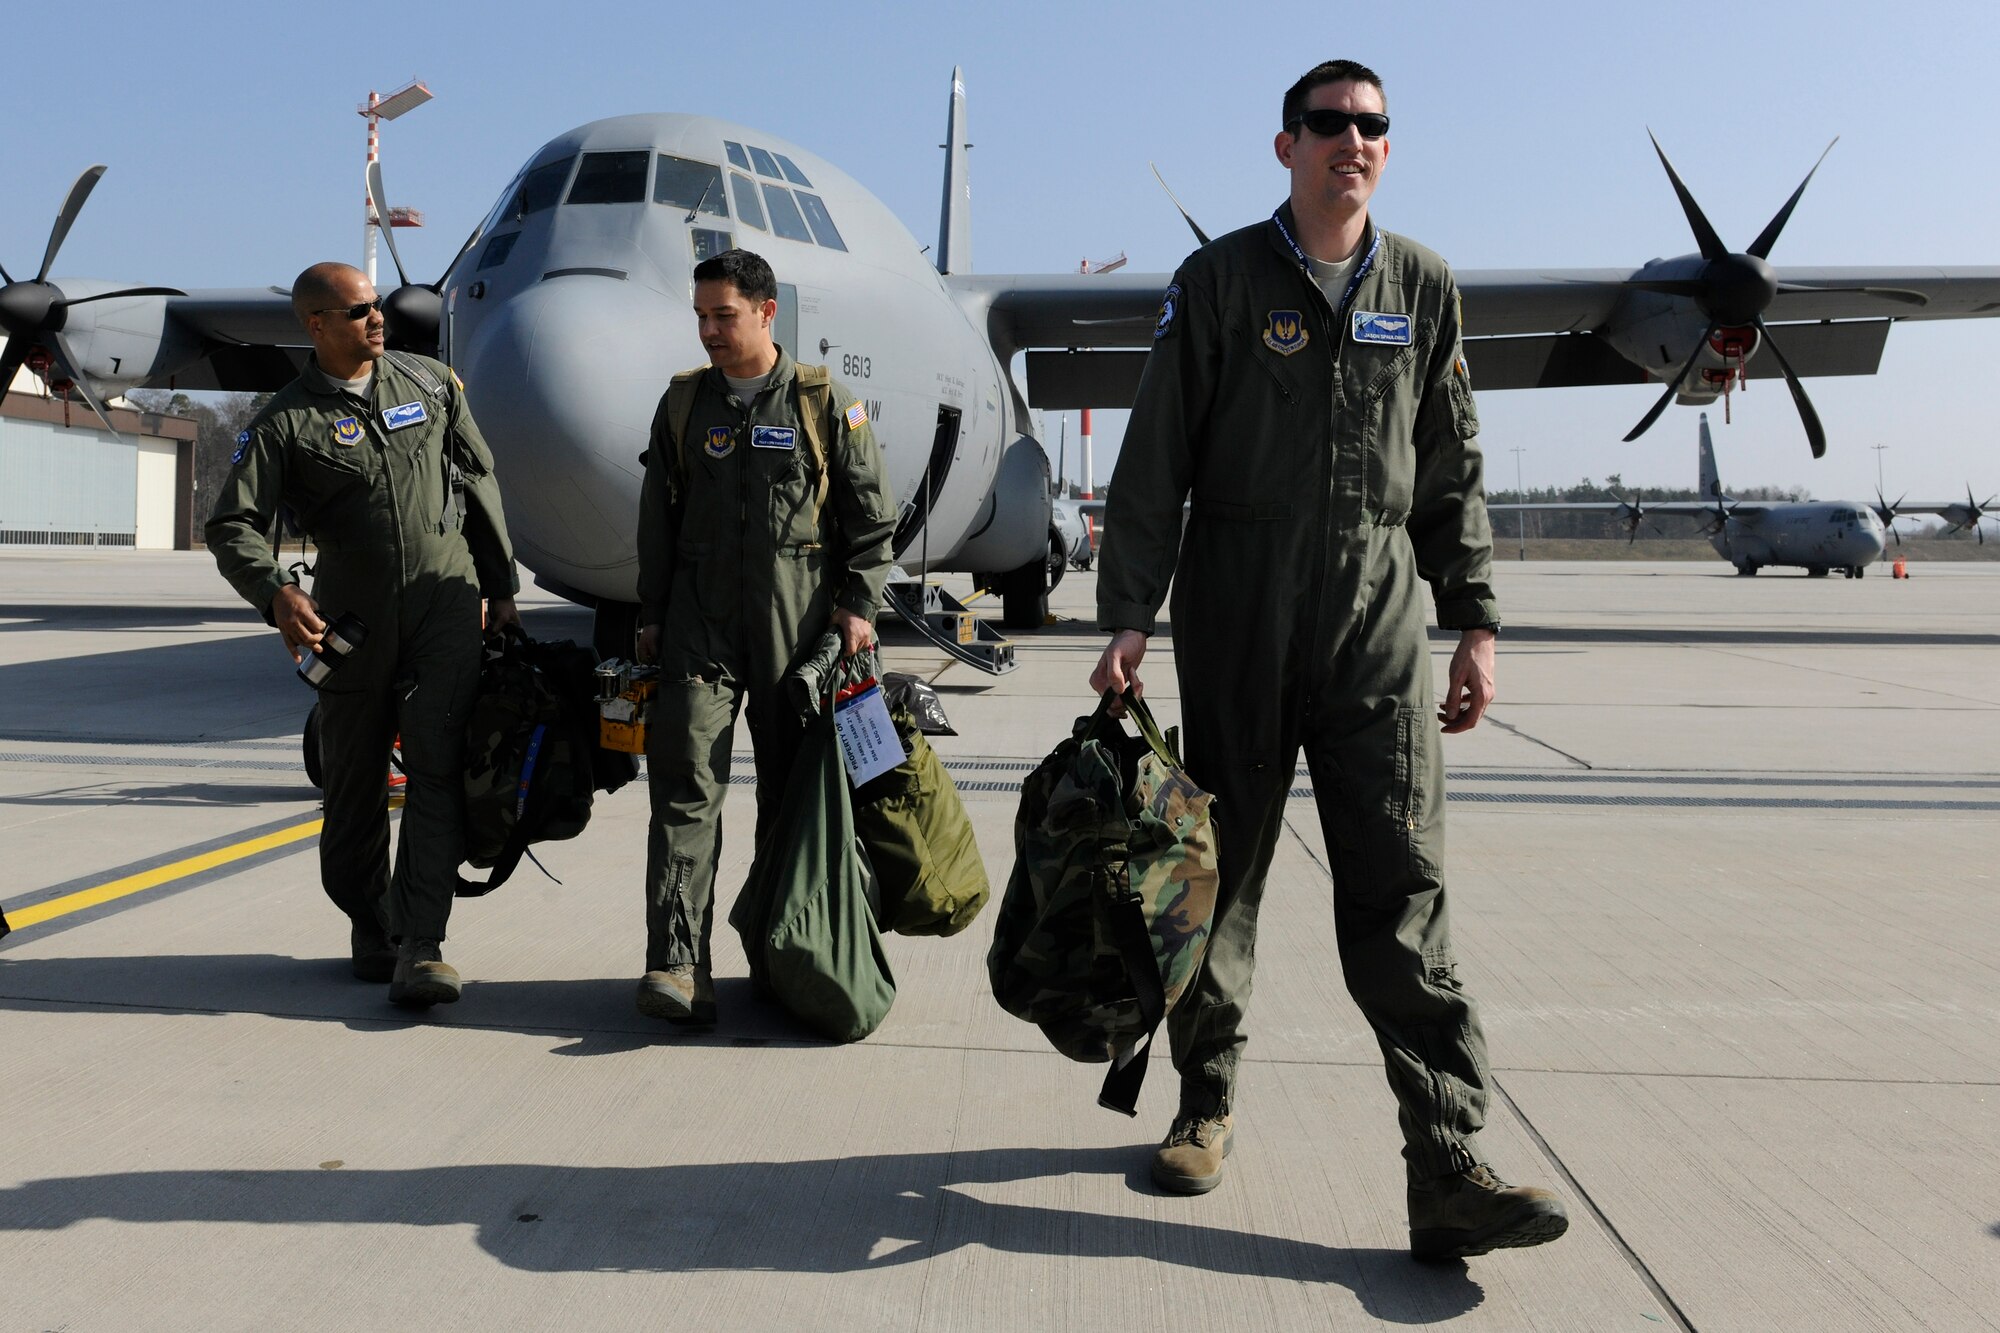 Capt. Jason Spaulding, 37th Airlift Squadron pilot, Chief Master Sgt. Lewis Holston, 37th Airlift Squadron superintendent, and Tech. Sgt. Kepa Kahihikolo, 37th Airlift Squadron loadmaster, depart from a C-130J after completing a week-long training exercise with a ten-bundle container deployment system drop March 16, 2012 at Ramstein Air Base, Germany.  The cargo was dropped in order to support field-training exercises for the 173rd Airborne Brigade Combat Team from Vicenza, Italy. This training gave pilots and loadmasters here an opportunity to practice this type of airdrop.  (U.S. Air Force photo/Staff Sgt. Chris Willis)